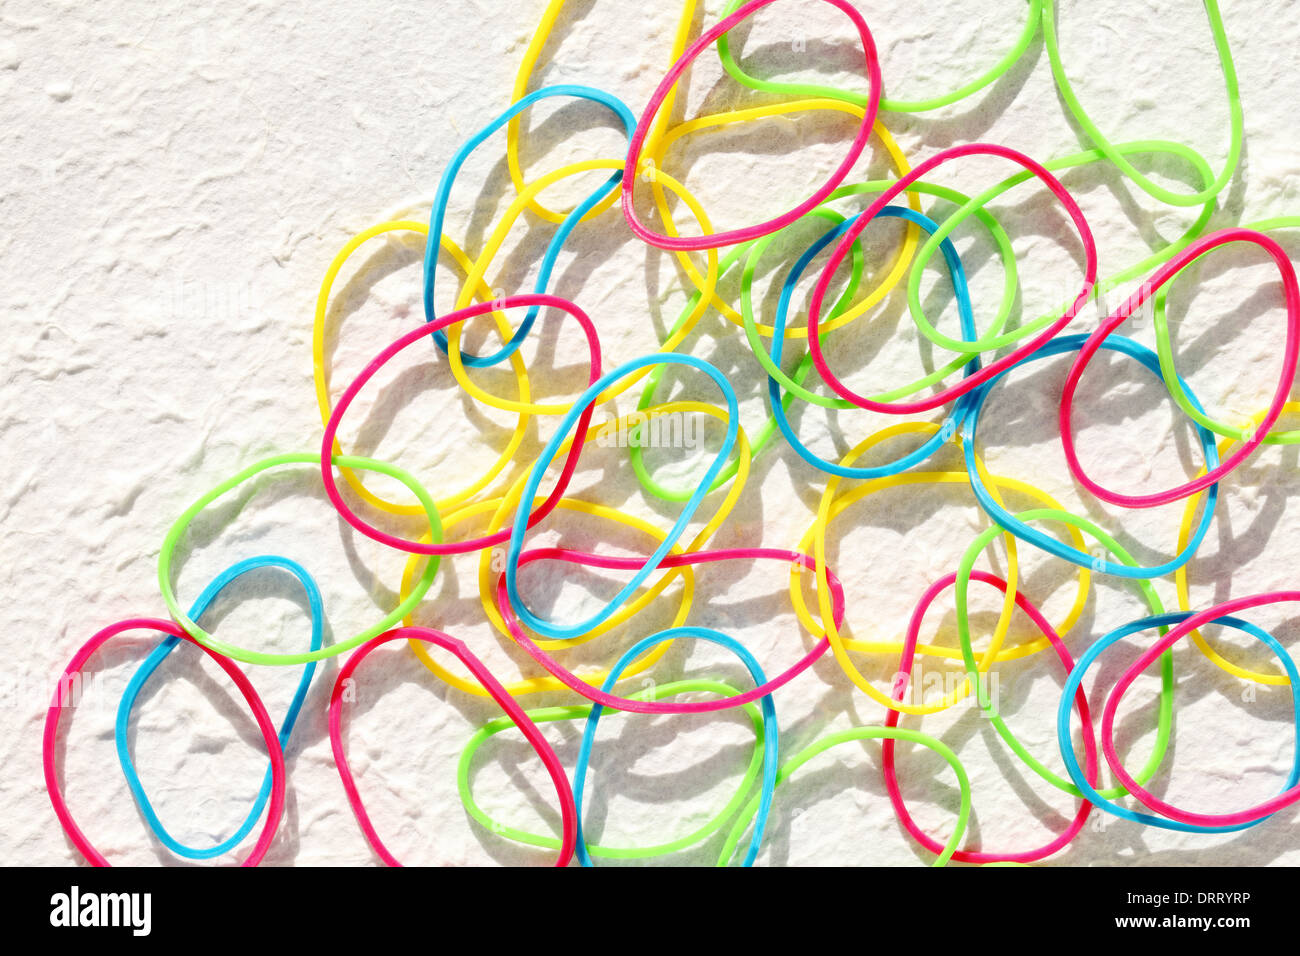 Colorful rubber bands on white background Stock Photo